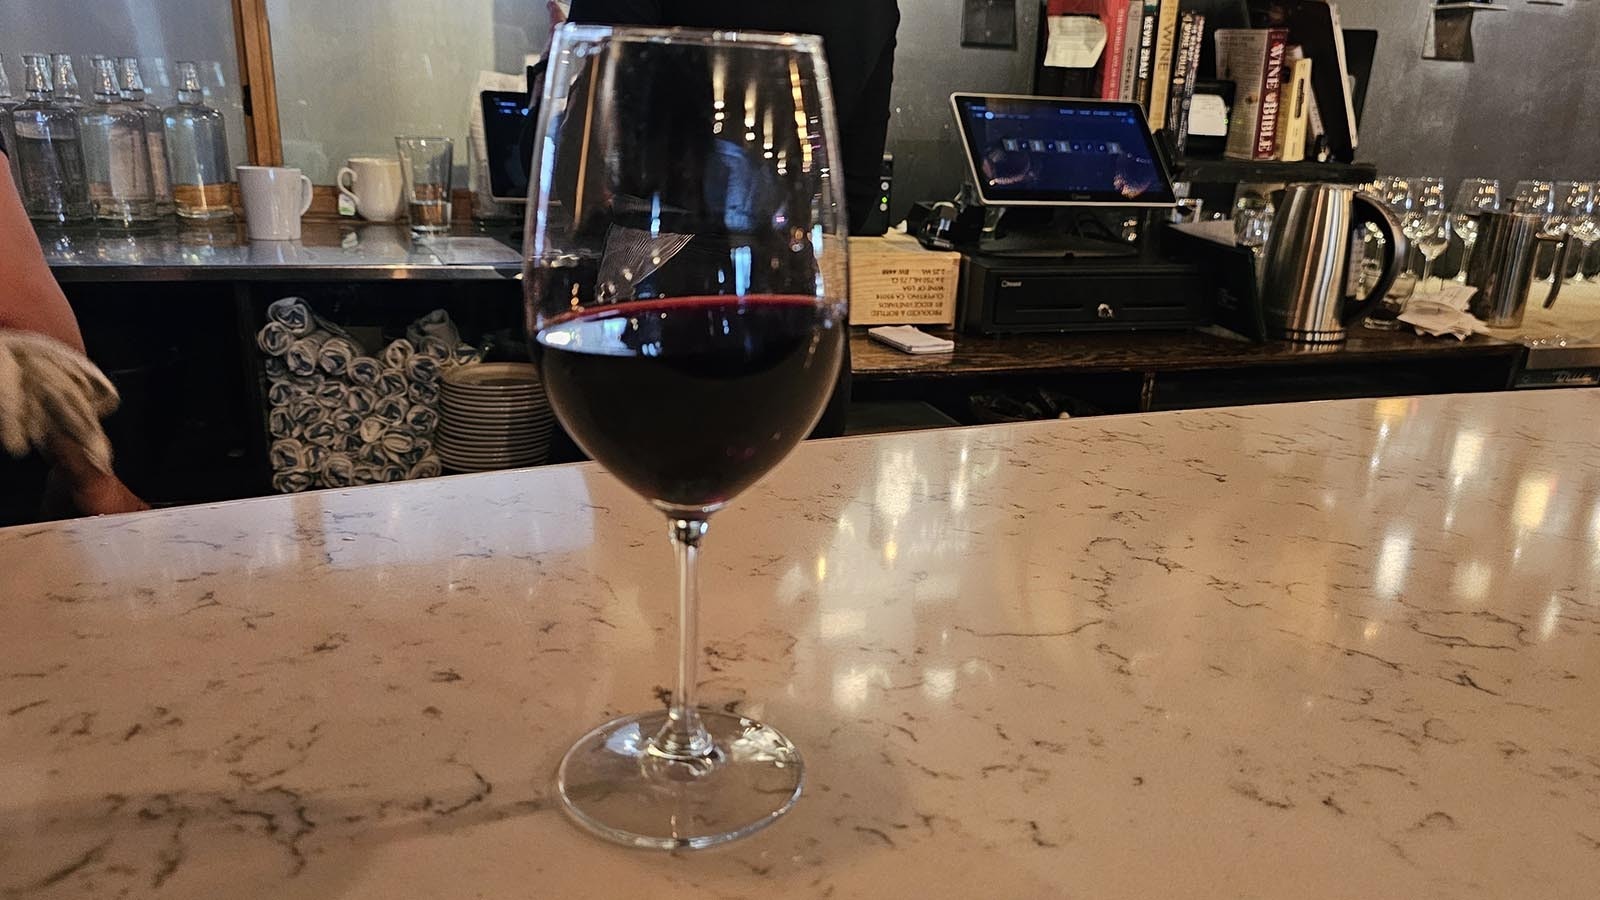 Wines by the glass are a great way to try a new wine before committing to a new bottle. The selections at Bin22 change every so often, giving customers a chance to sample something new.